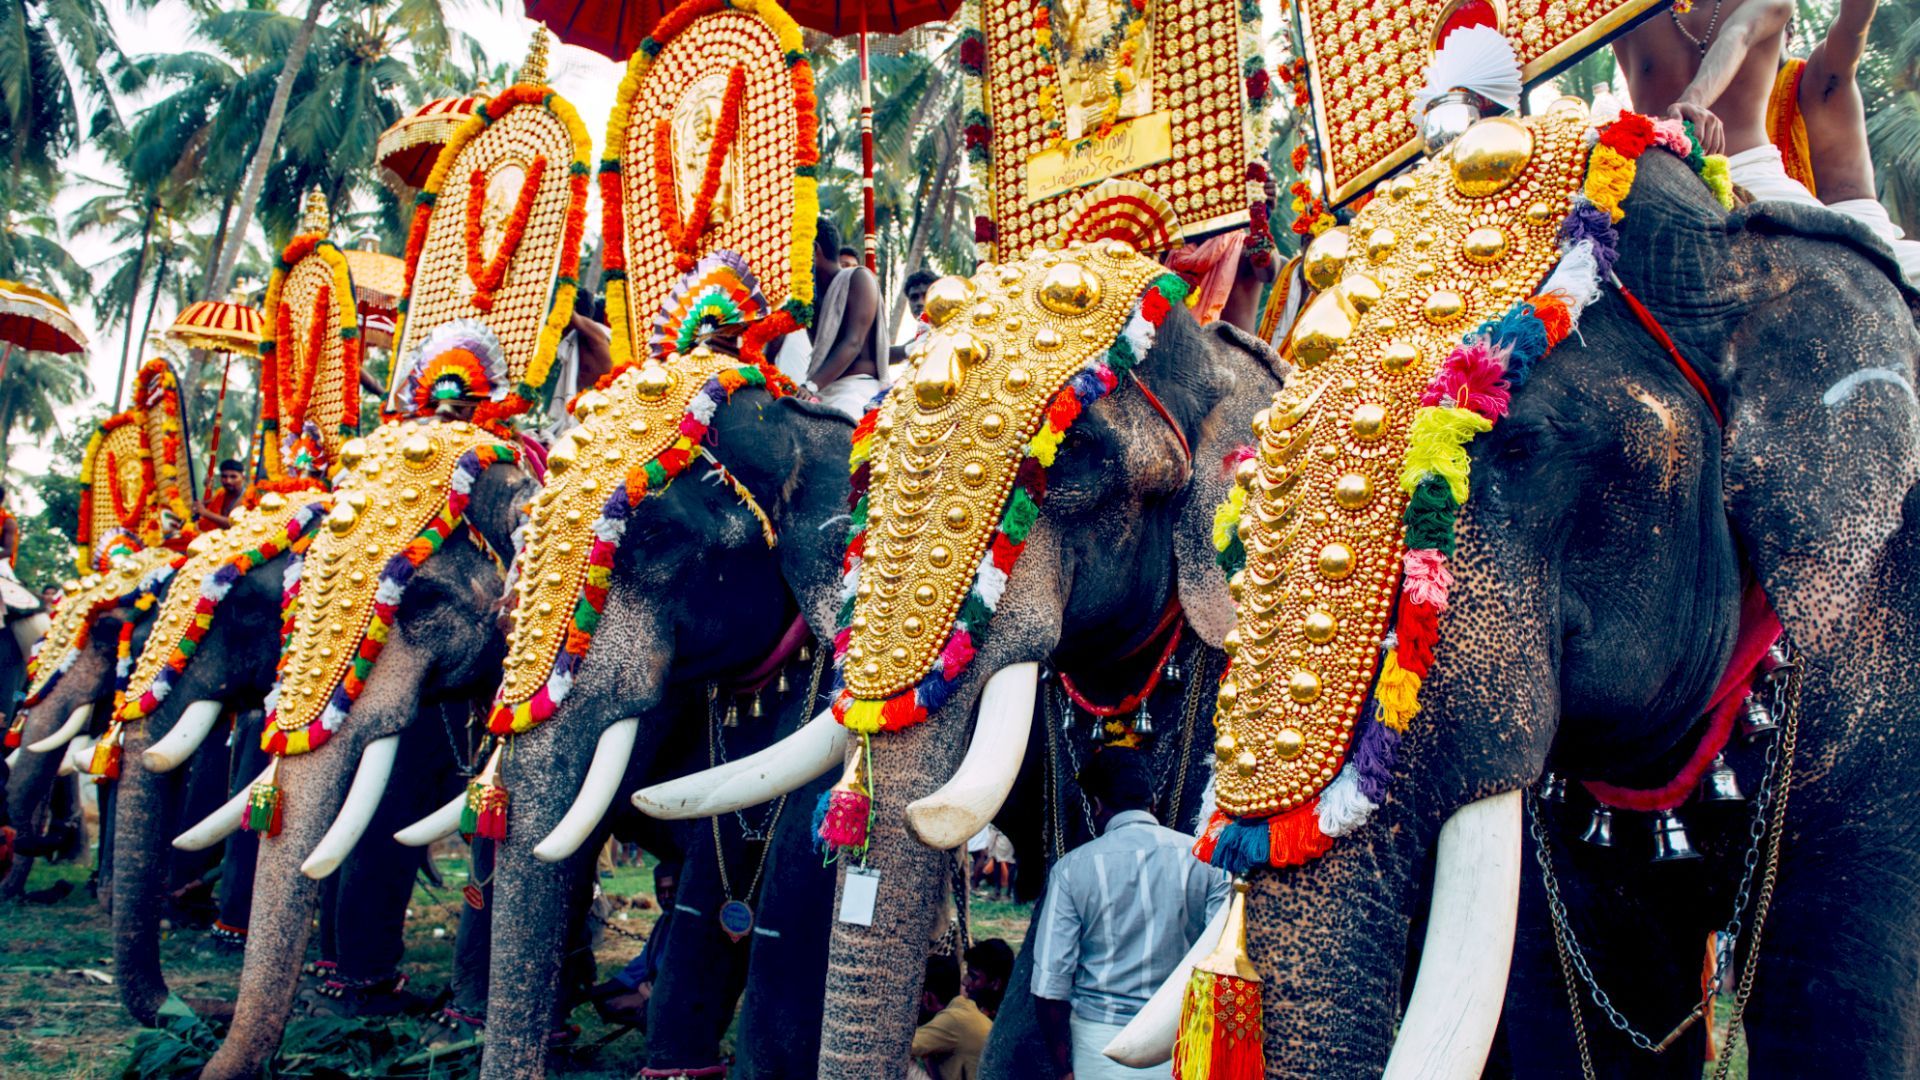 a row of decorated elephants are lined up for the Thrissur Pooram Elephant Festival, India